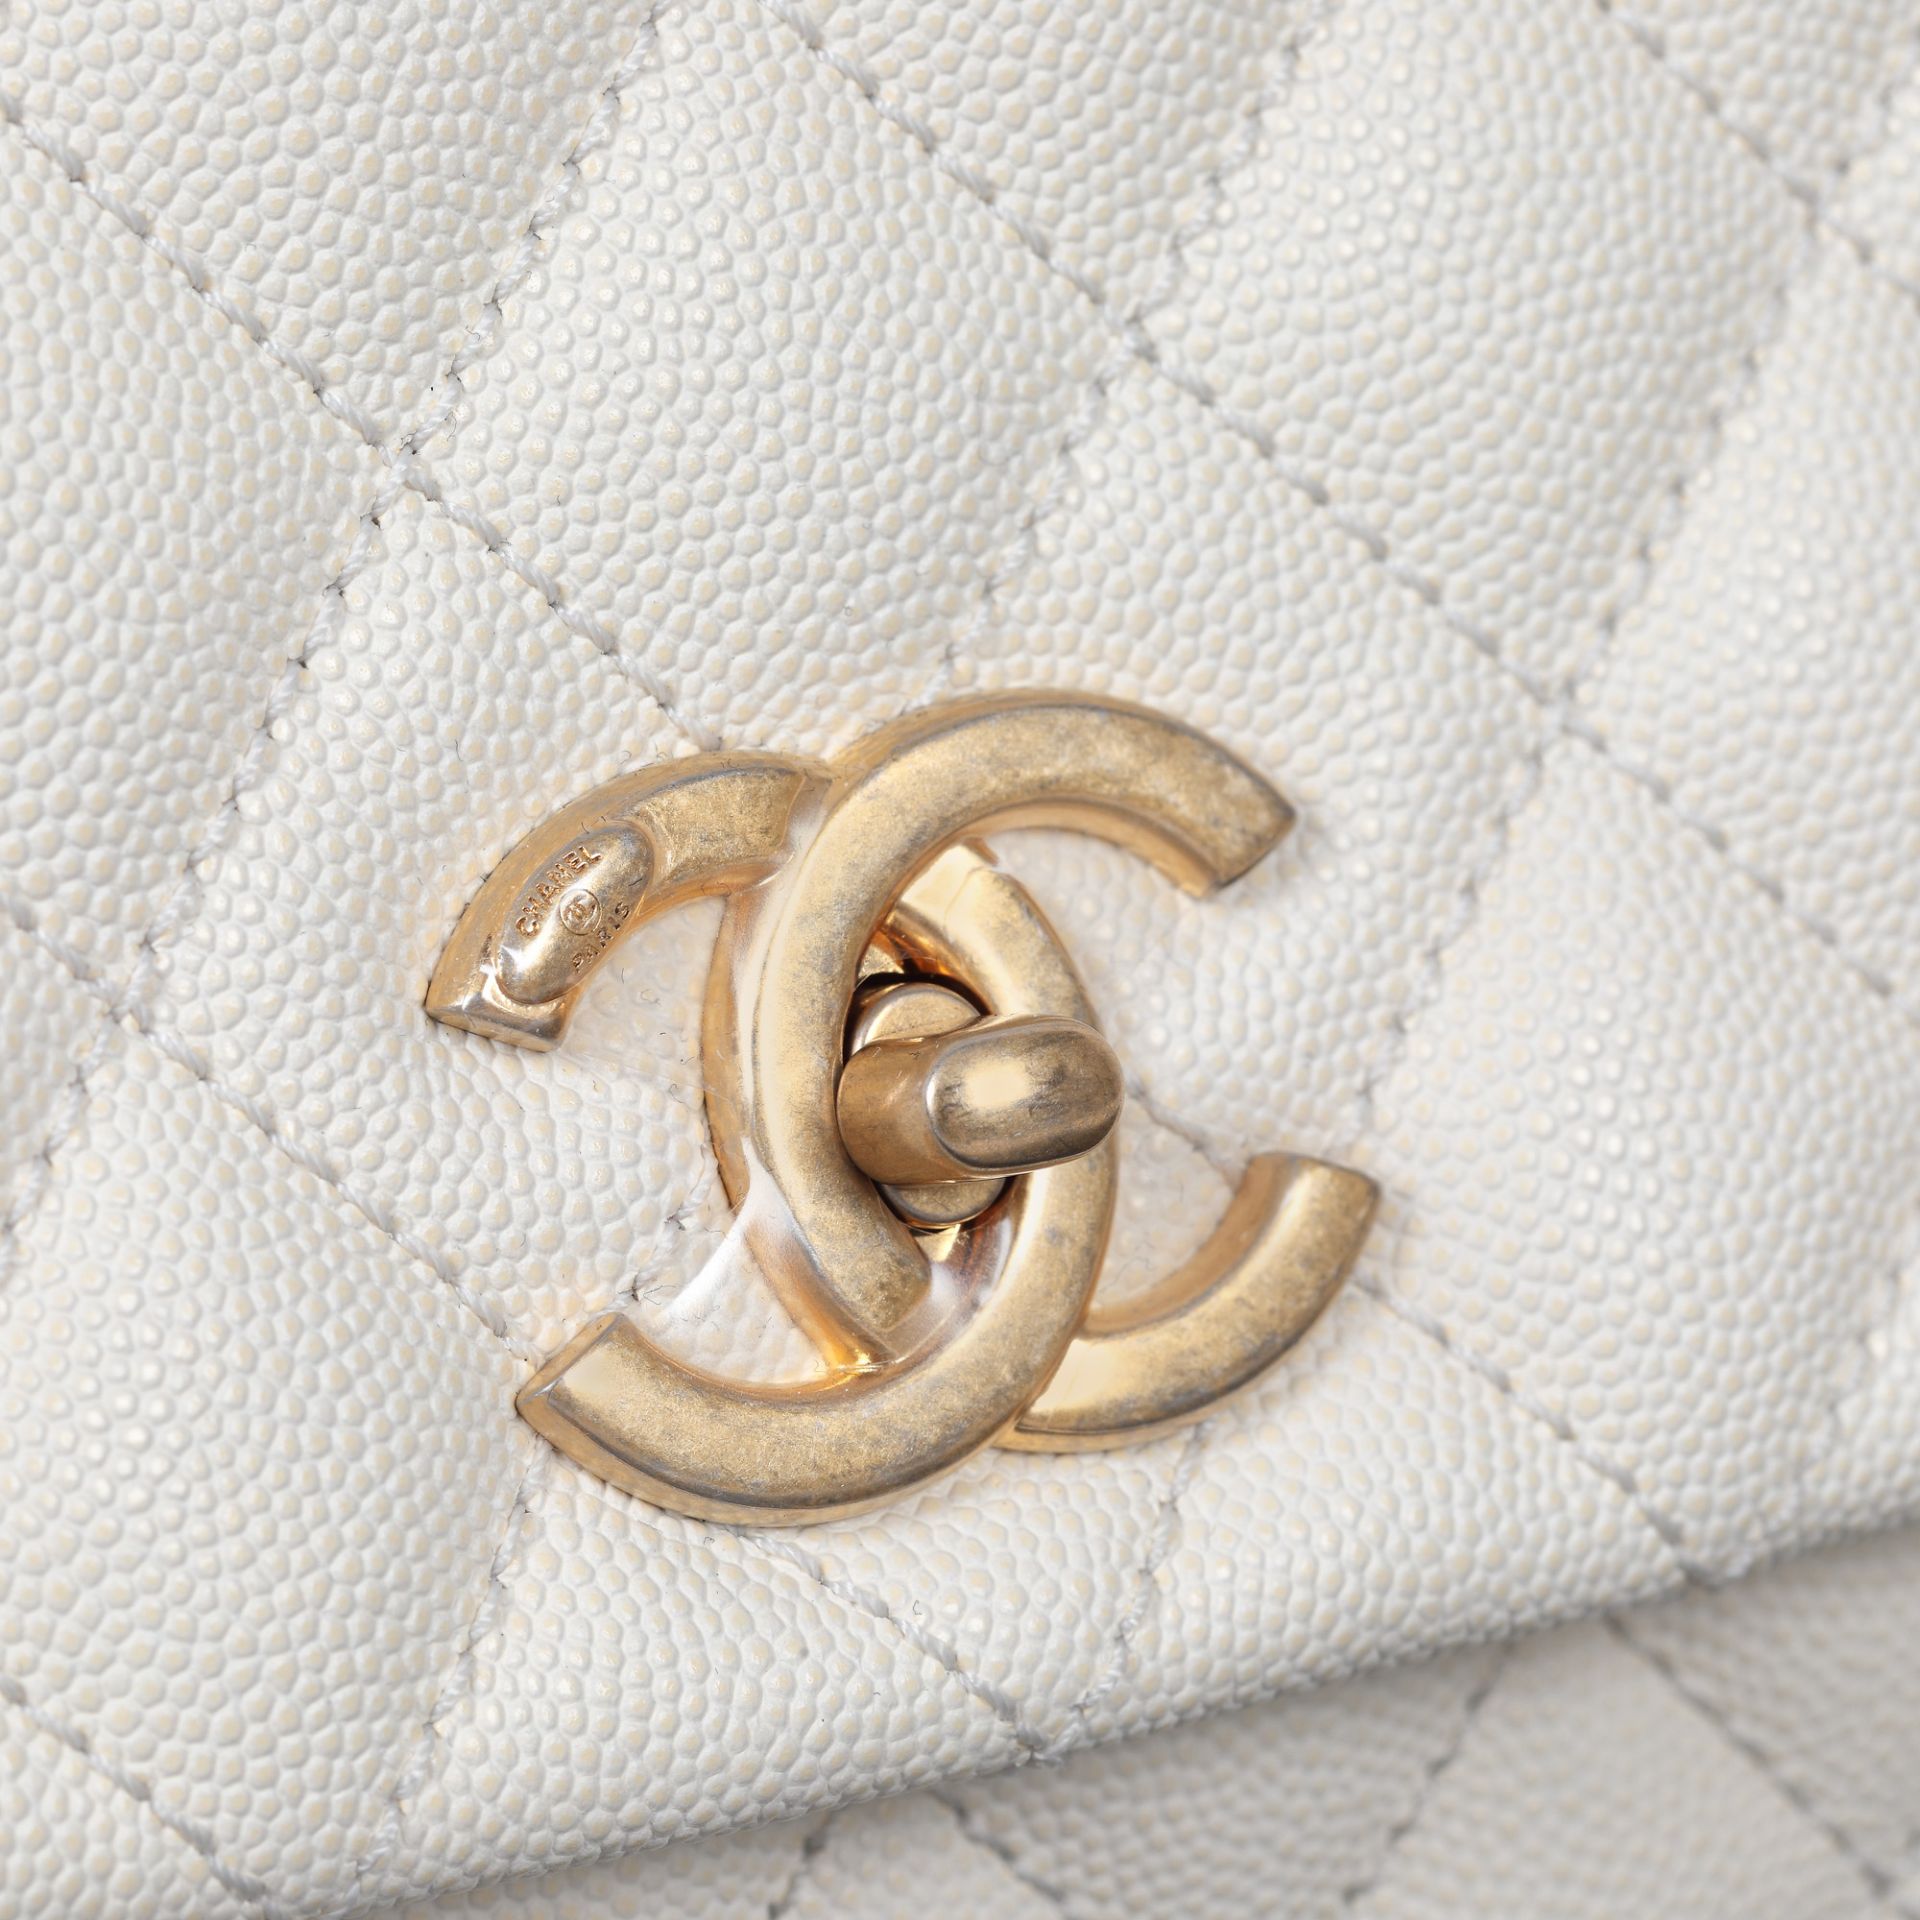 "Coco Handle Bag" - Chanel bag, quilted leather, white, lizard leather handle, burgundy - Image 2 of 11